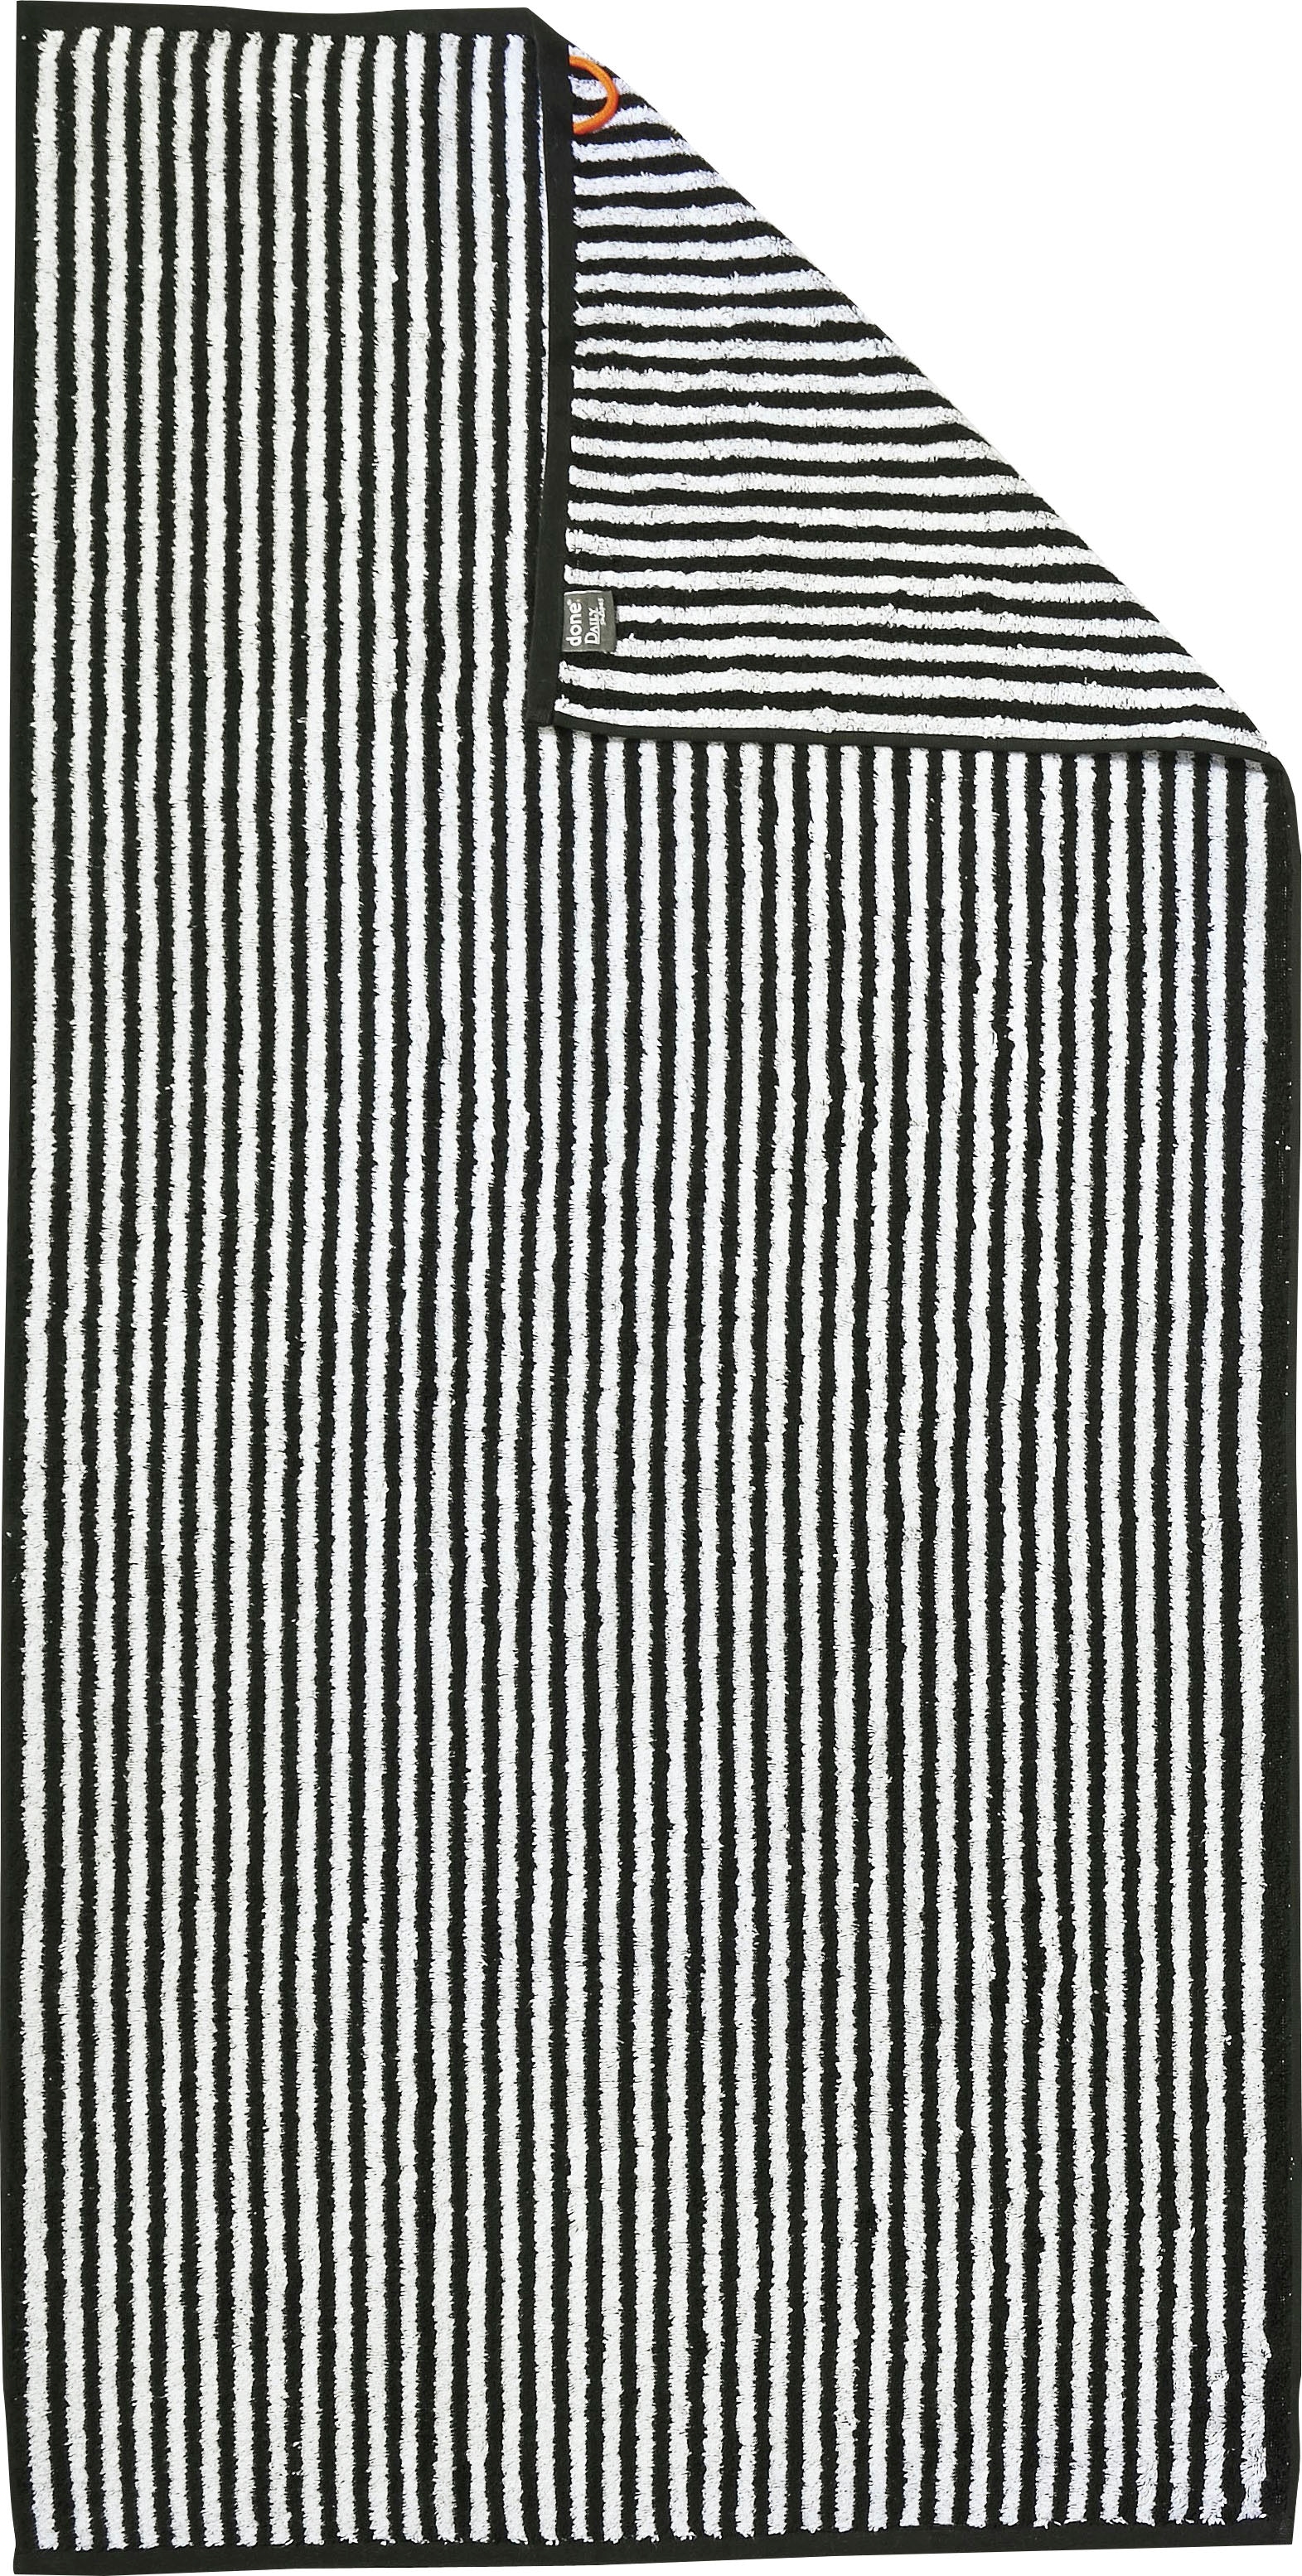 done.® Duschtuch »Daily Shapes Stripes«, BAUR St.), mit | (1 gestreift kaufen Jacquard-Muster